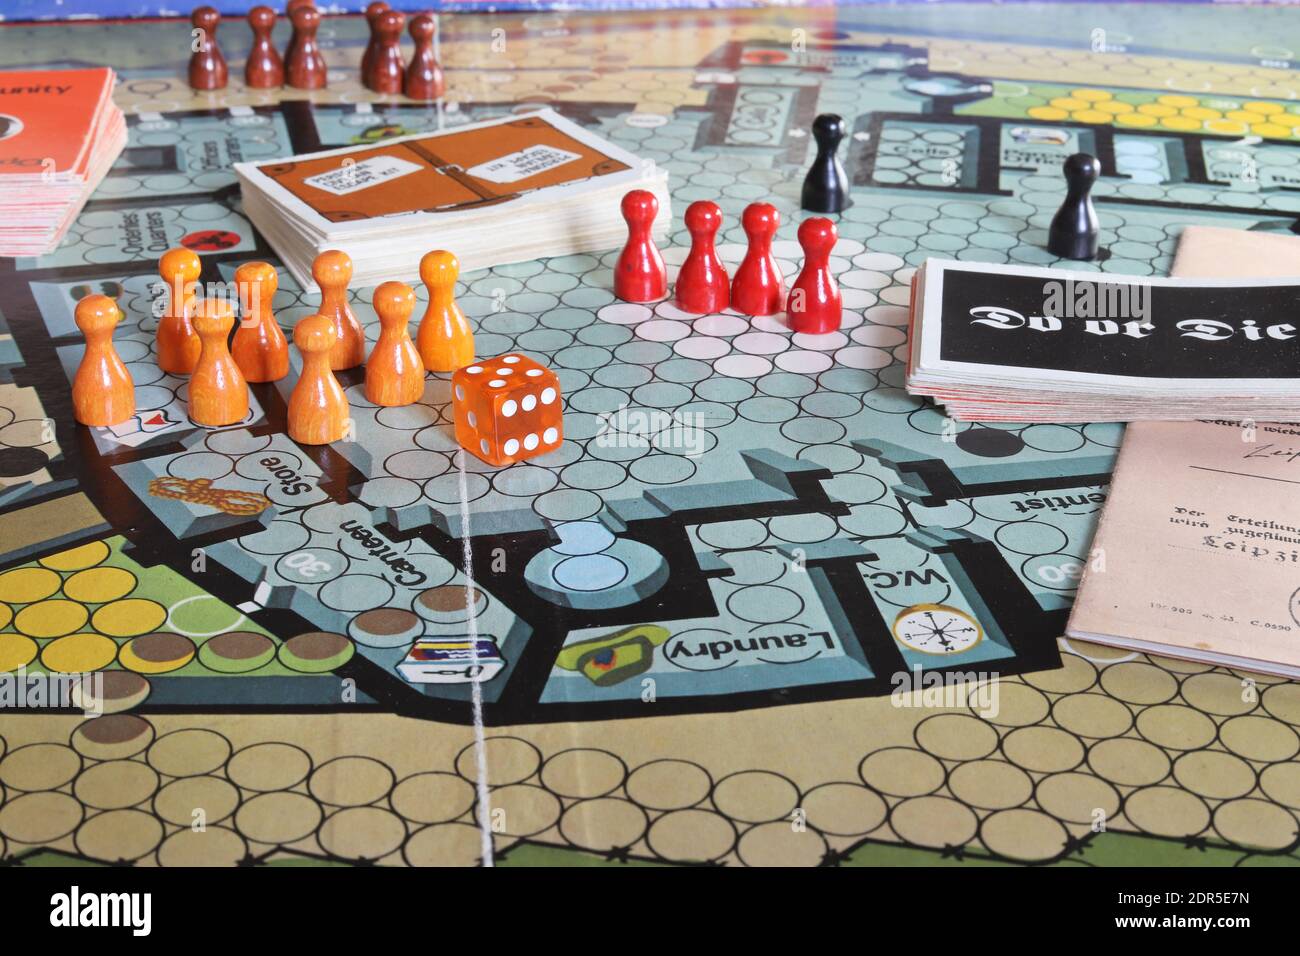 UK - Escape from Colditz board game from the 1970s. Orange, red and black playing pieces. Stock Photo